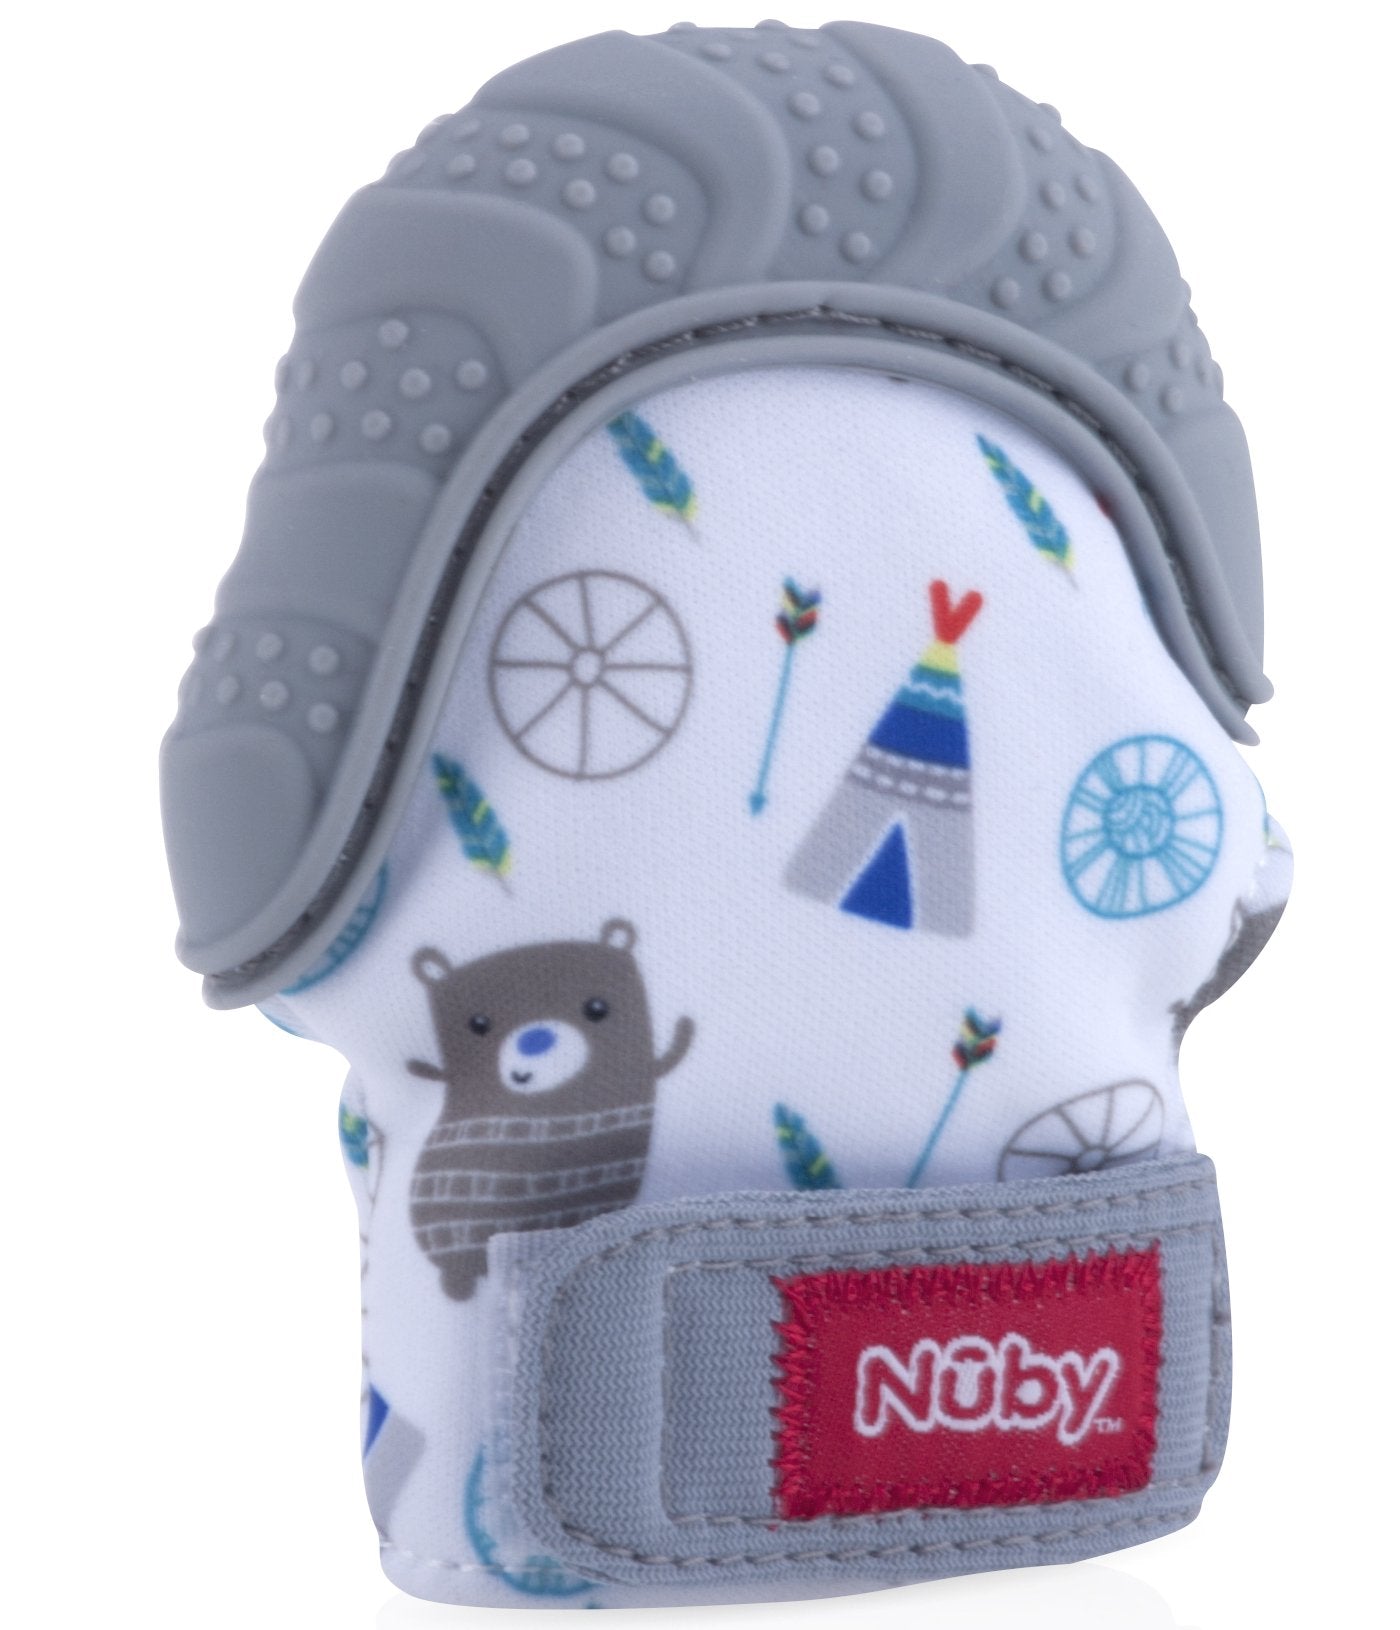 Nuby Soothing